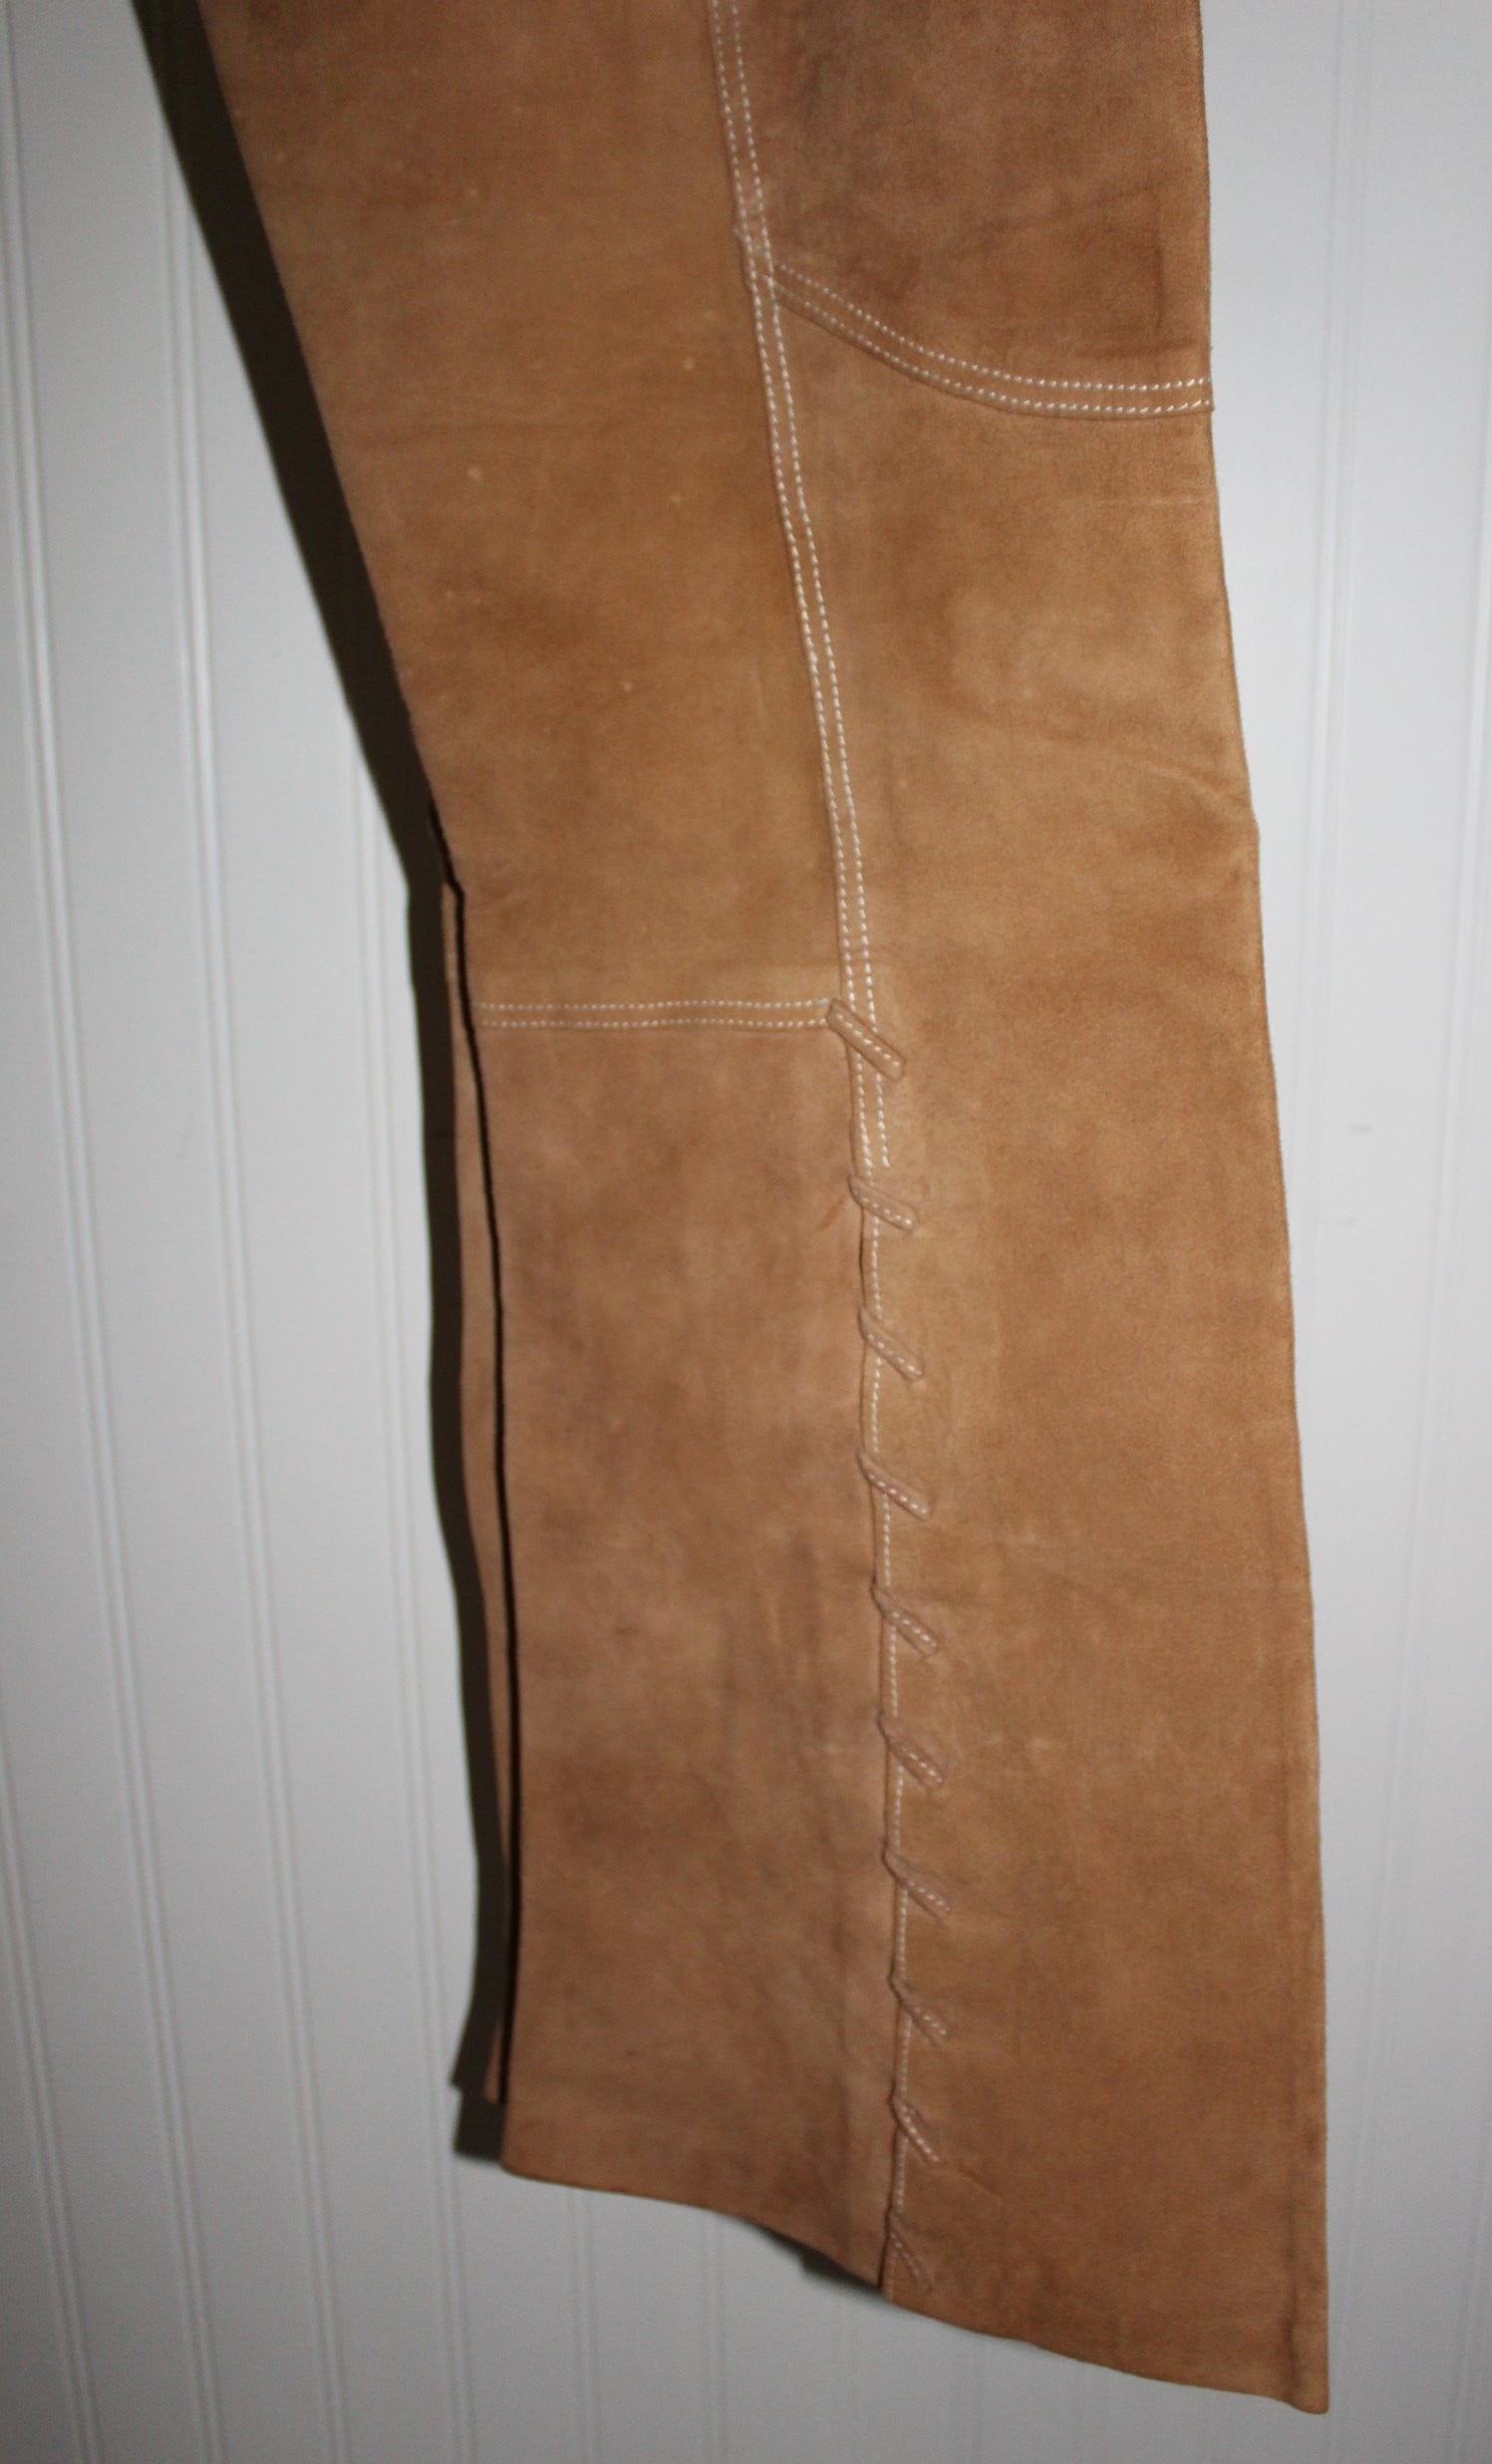 Vintage Leather Pants Laced Flare Leg Caramel Cream Top Stitch Great Detail collectible